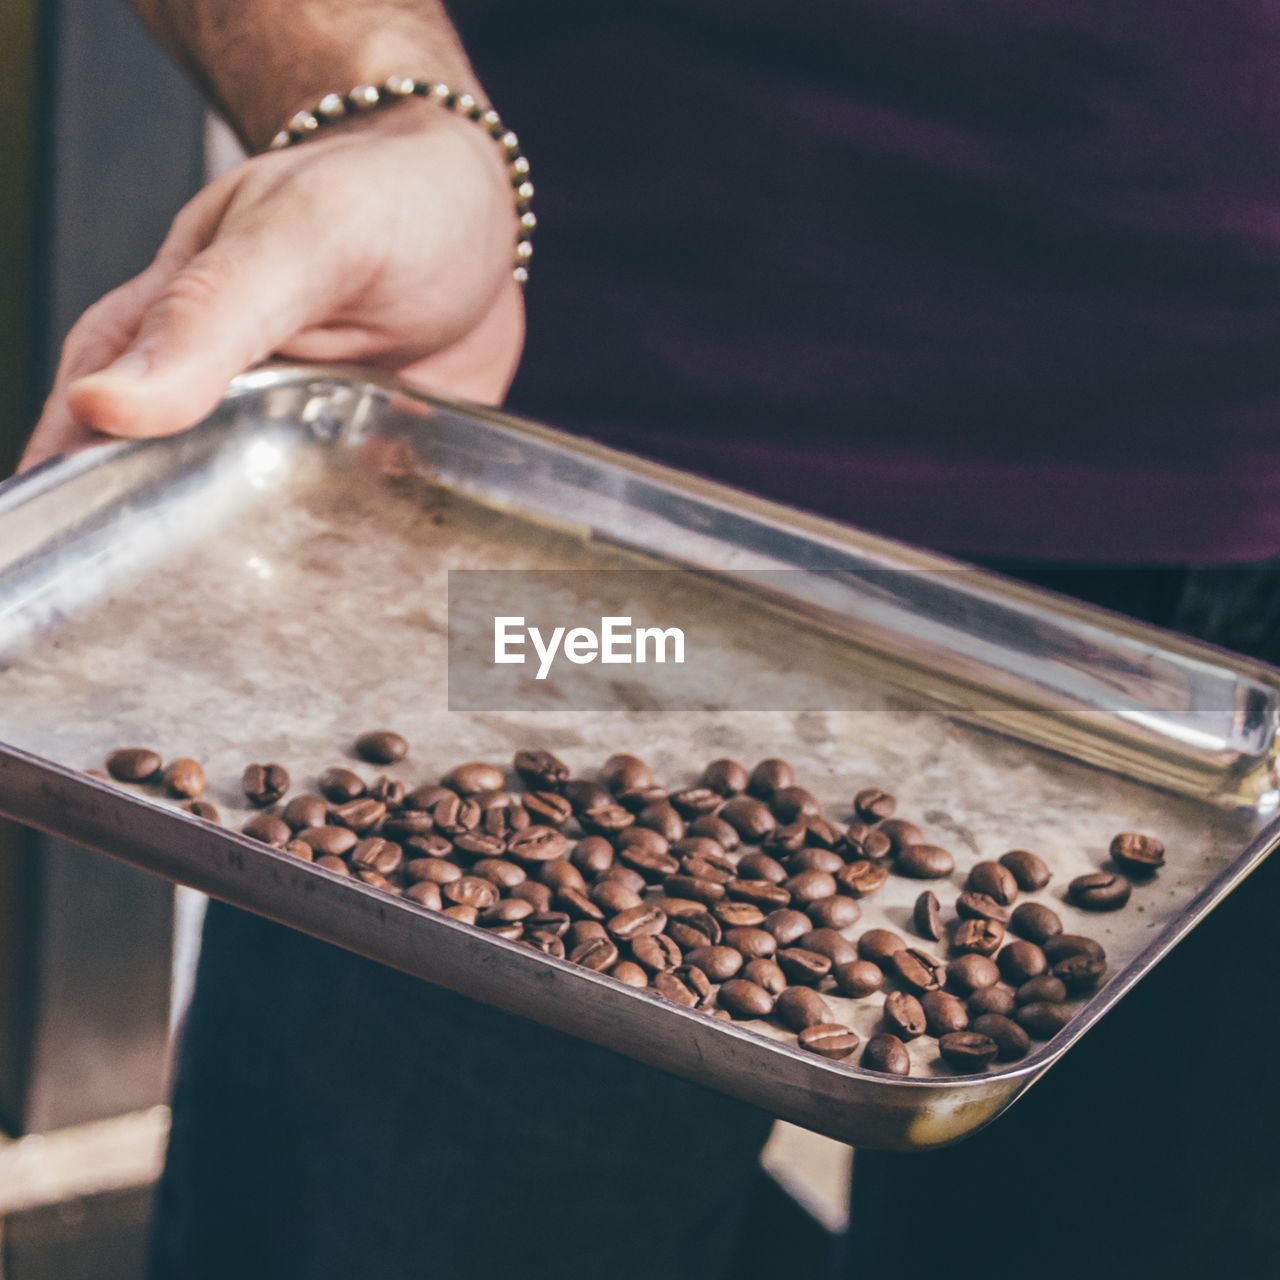 Man holding tray with coffe beans